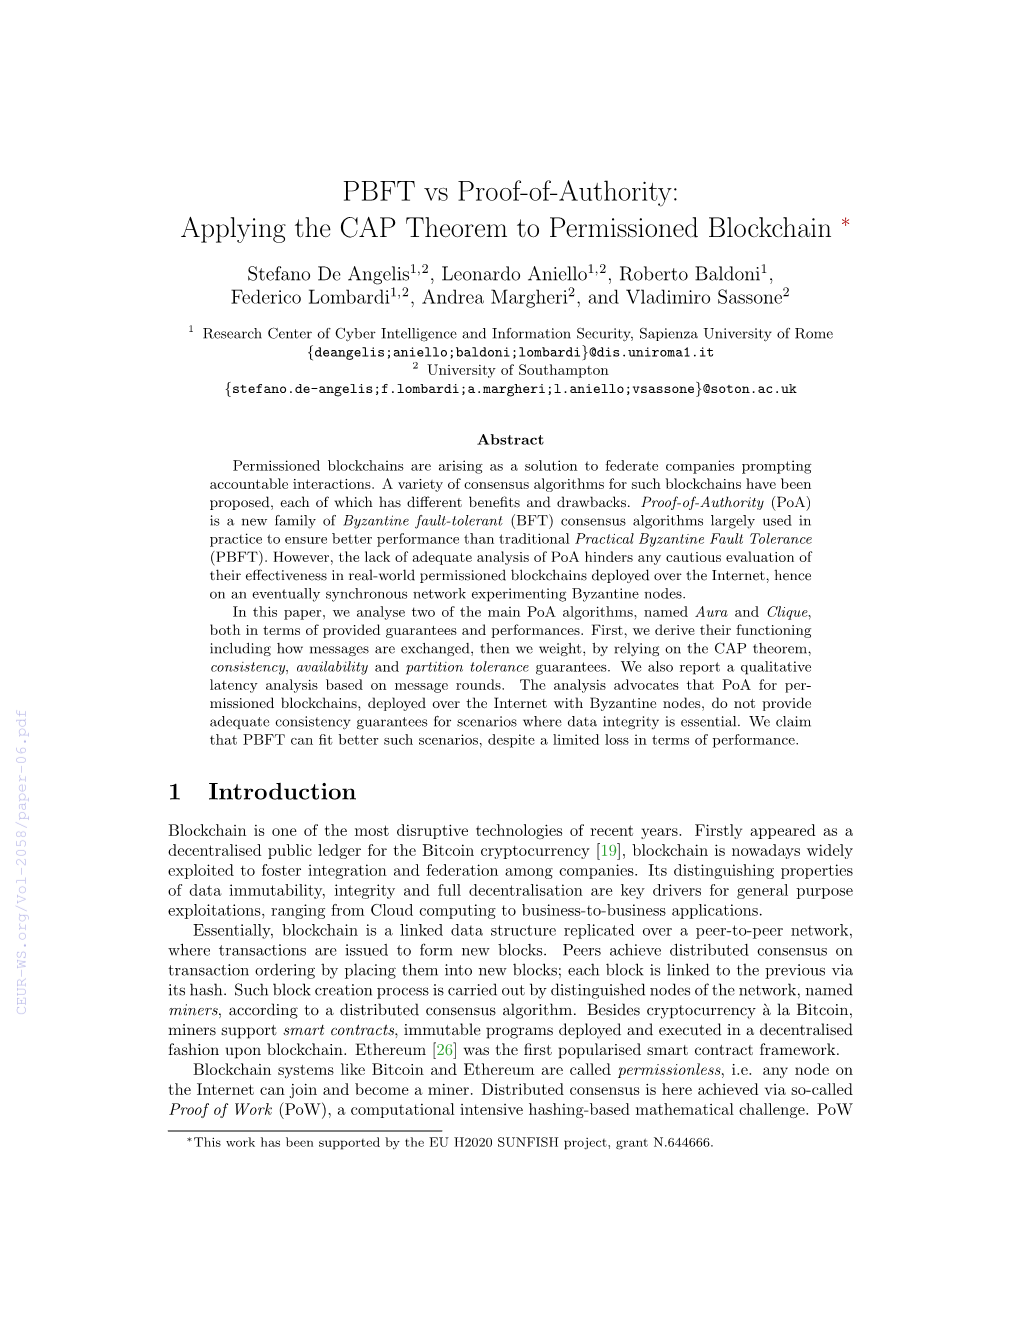 PBFT Vs Proof-Of-Authority: Applying the CAP Theorem to Permissioned Blockchain ∗